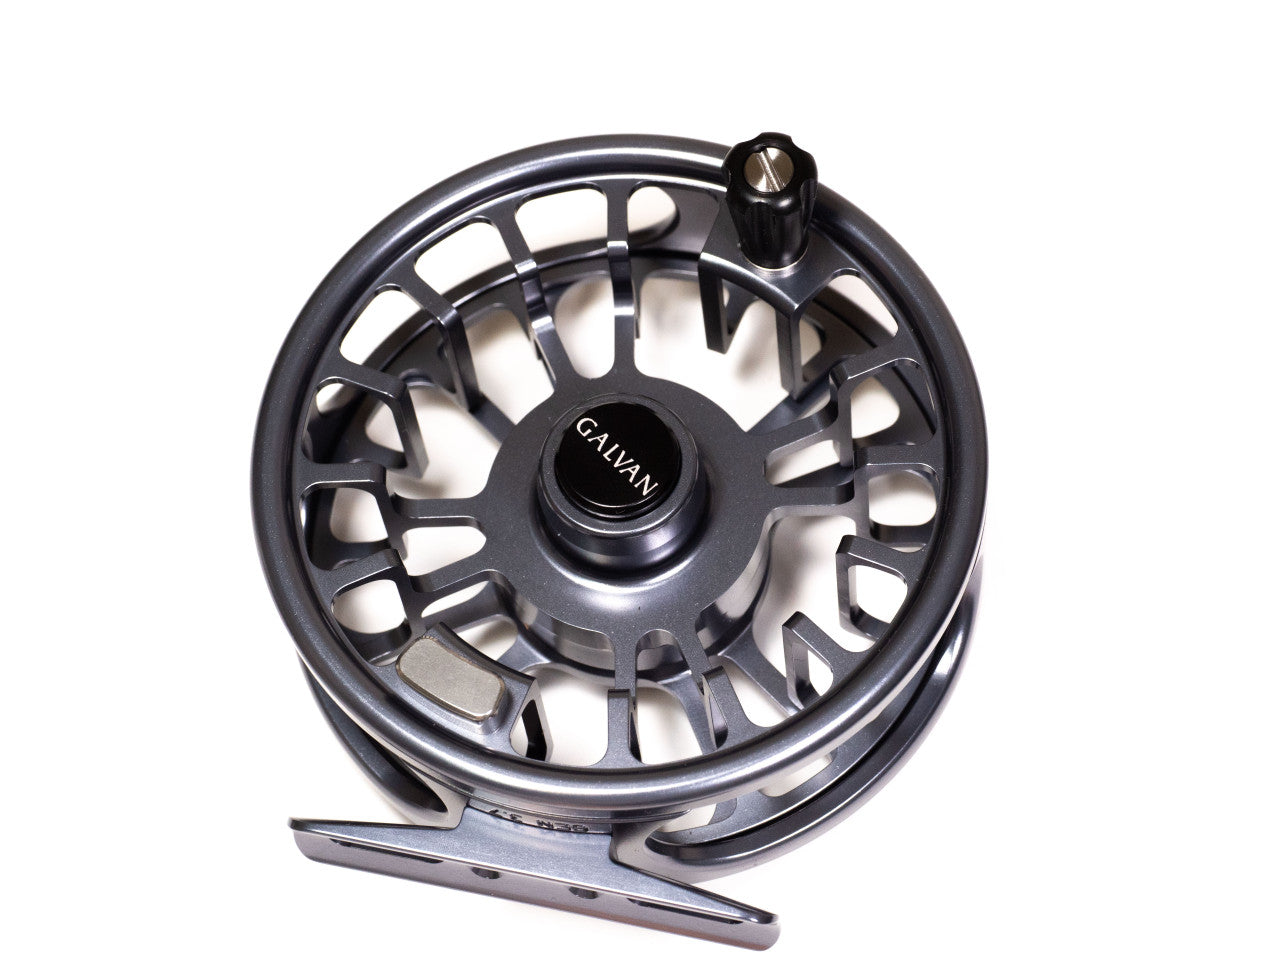 Galvan Euro Nymph Fly Reel - Fly Line Included